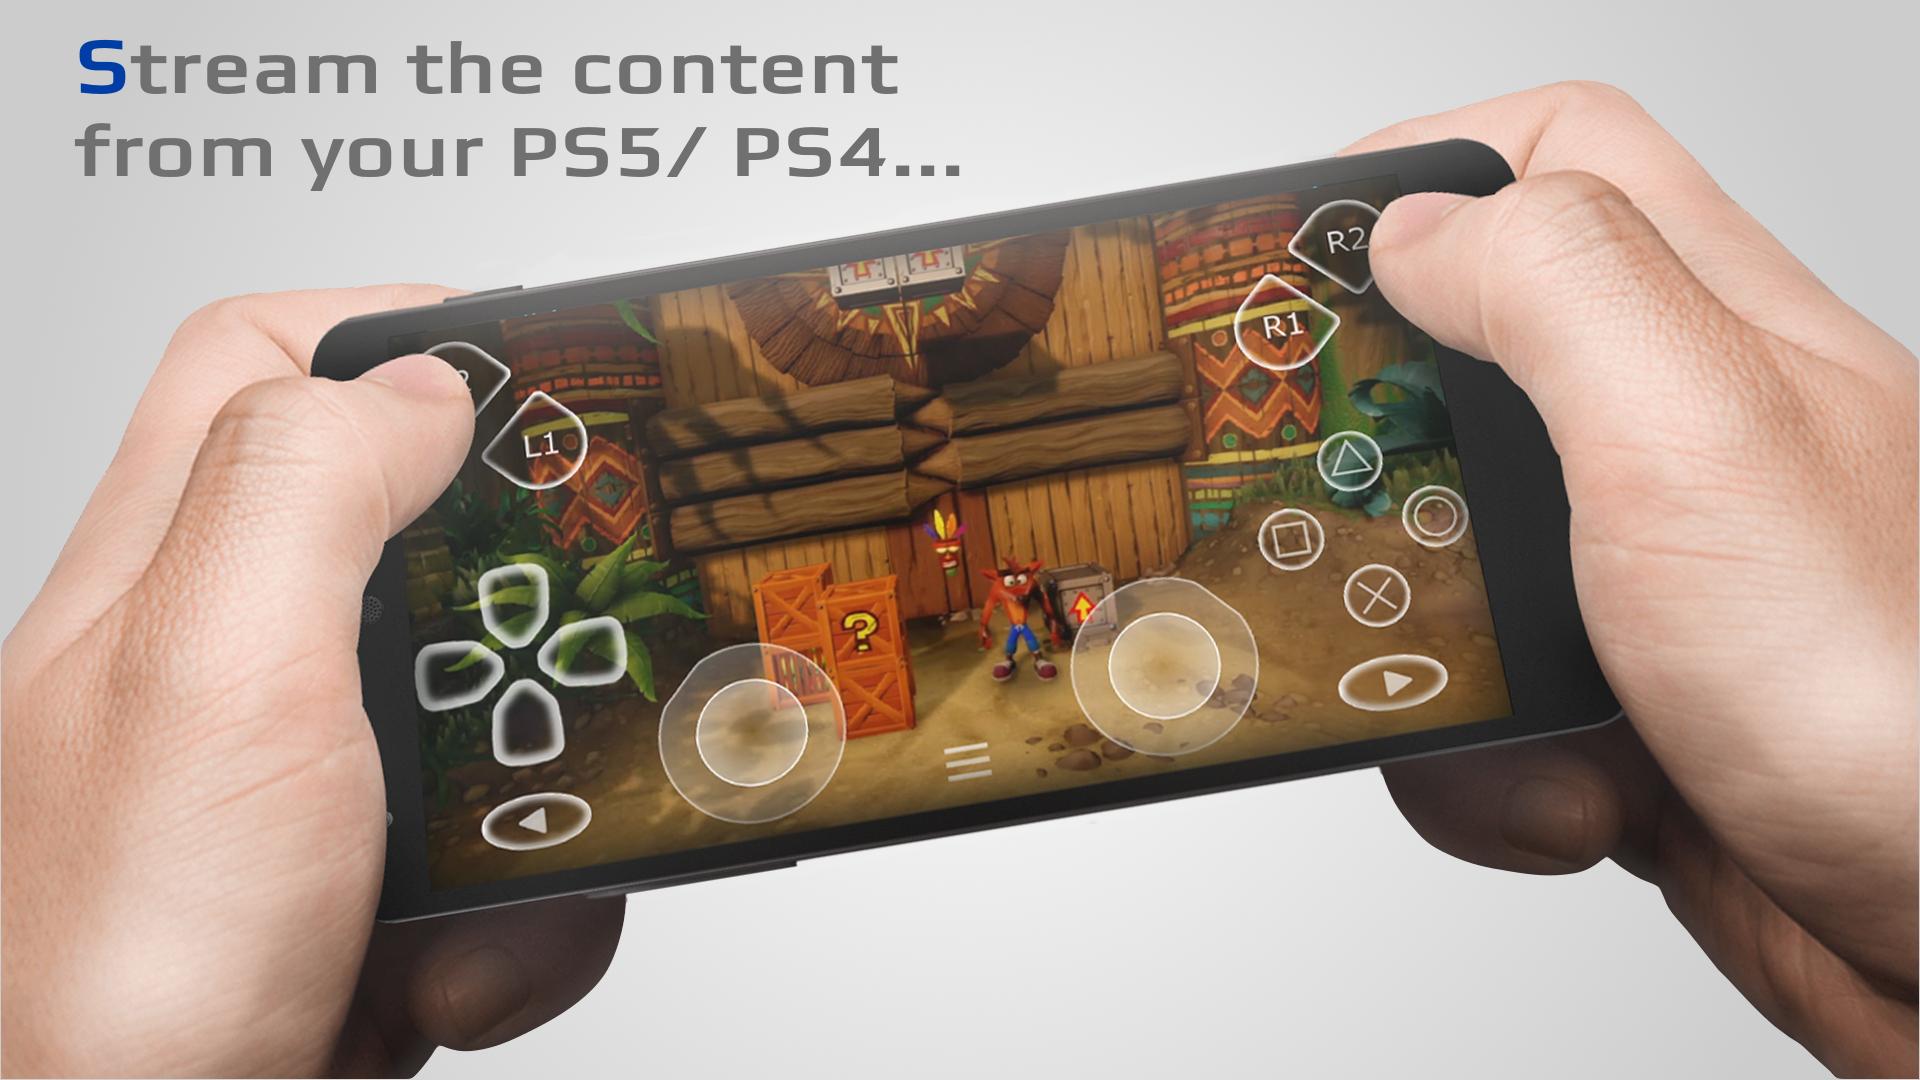 Https 5play mod. PSPLAY PS Remote. PSPLAY ps5 и ps4. PSPLAY ps5 и ps4 Remote Play. PS Play APK.